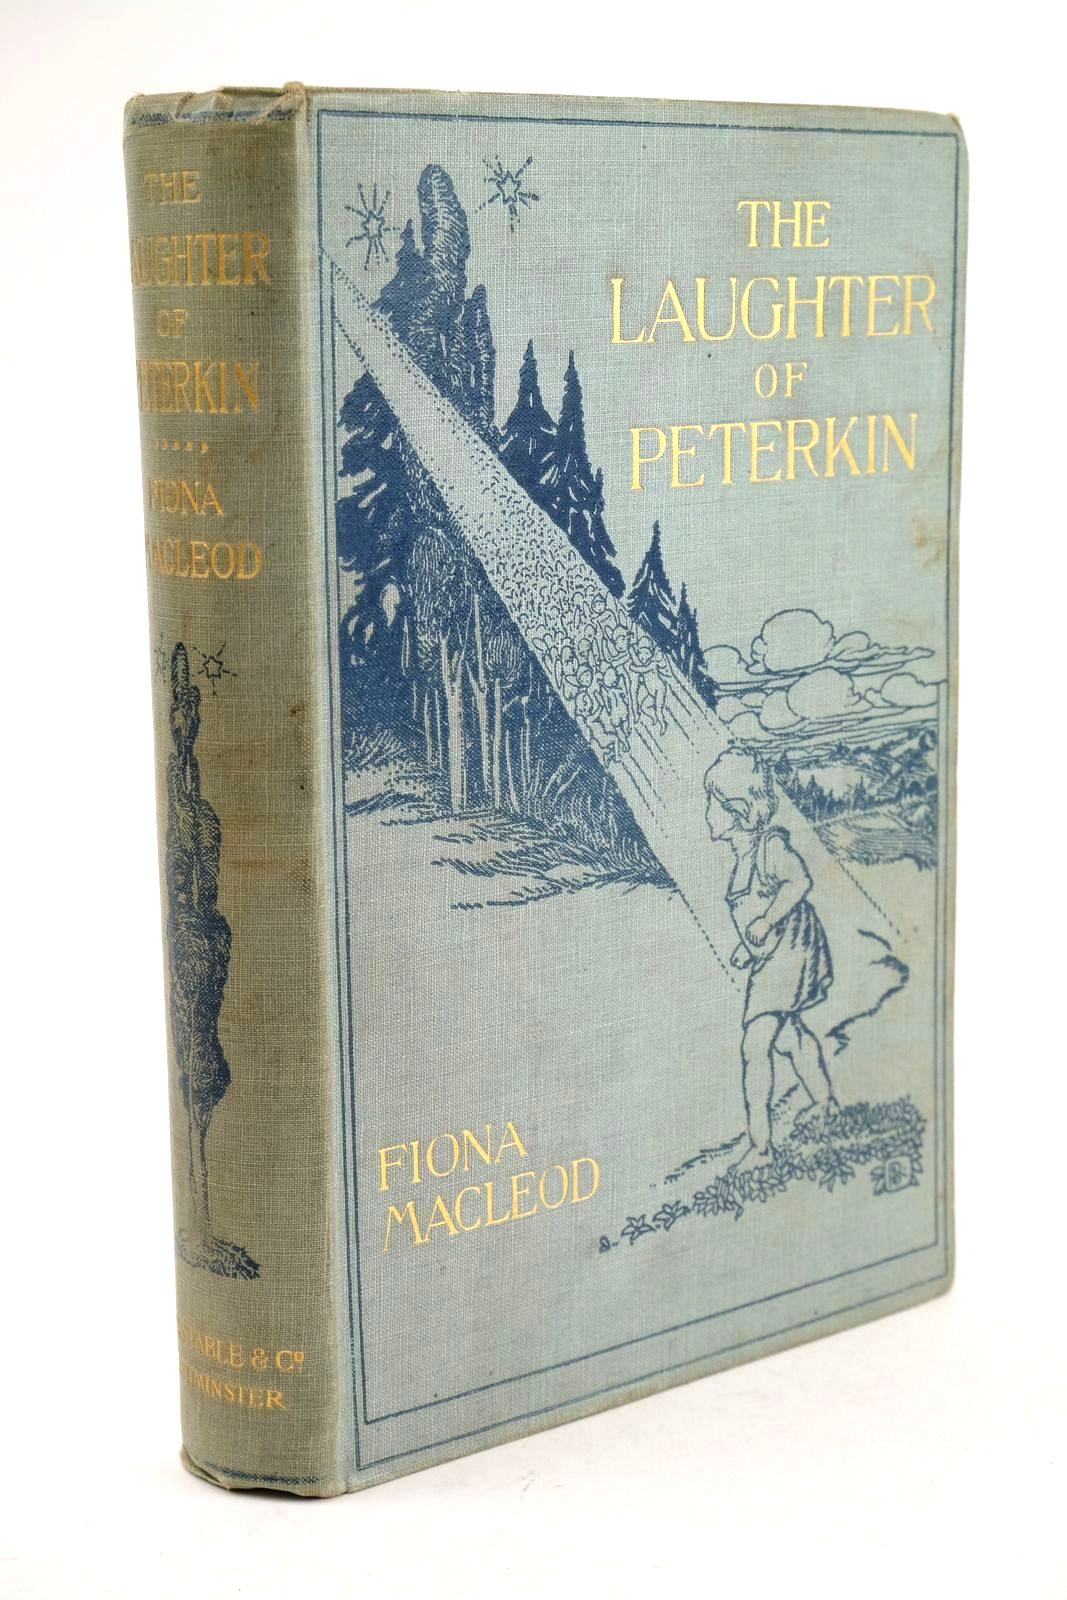 Photo of THE LAUGHTER OF PETERKIN- Stock Number: 1324238